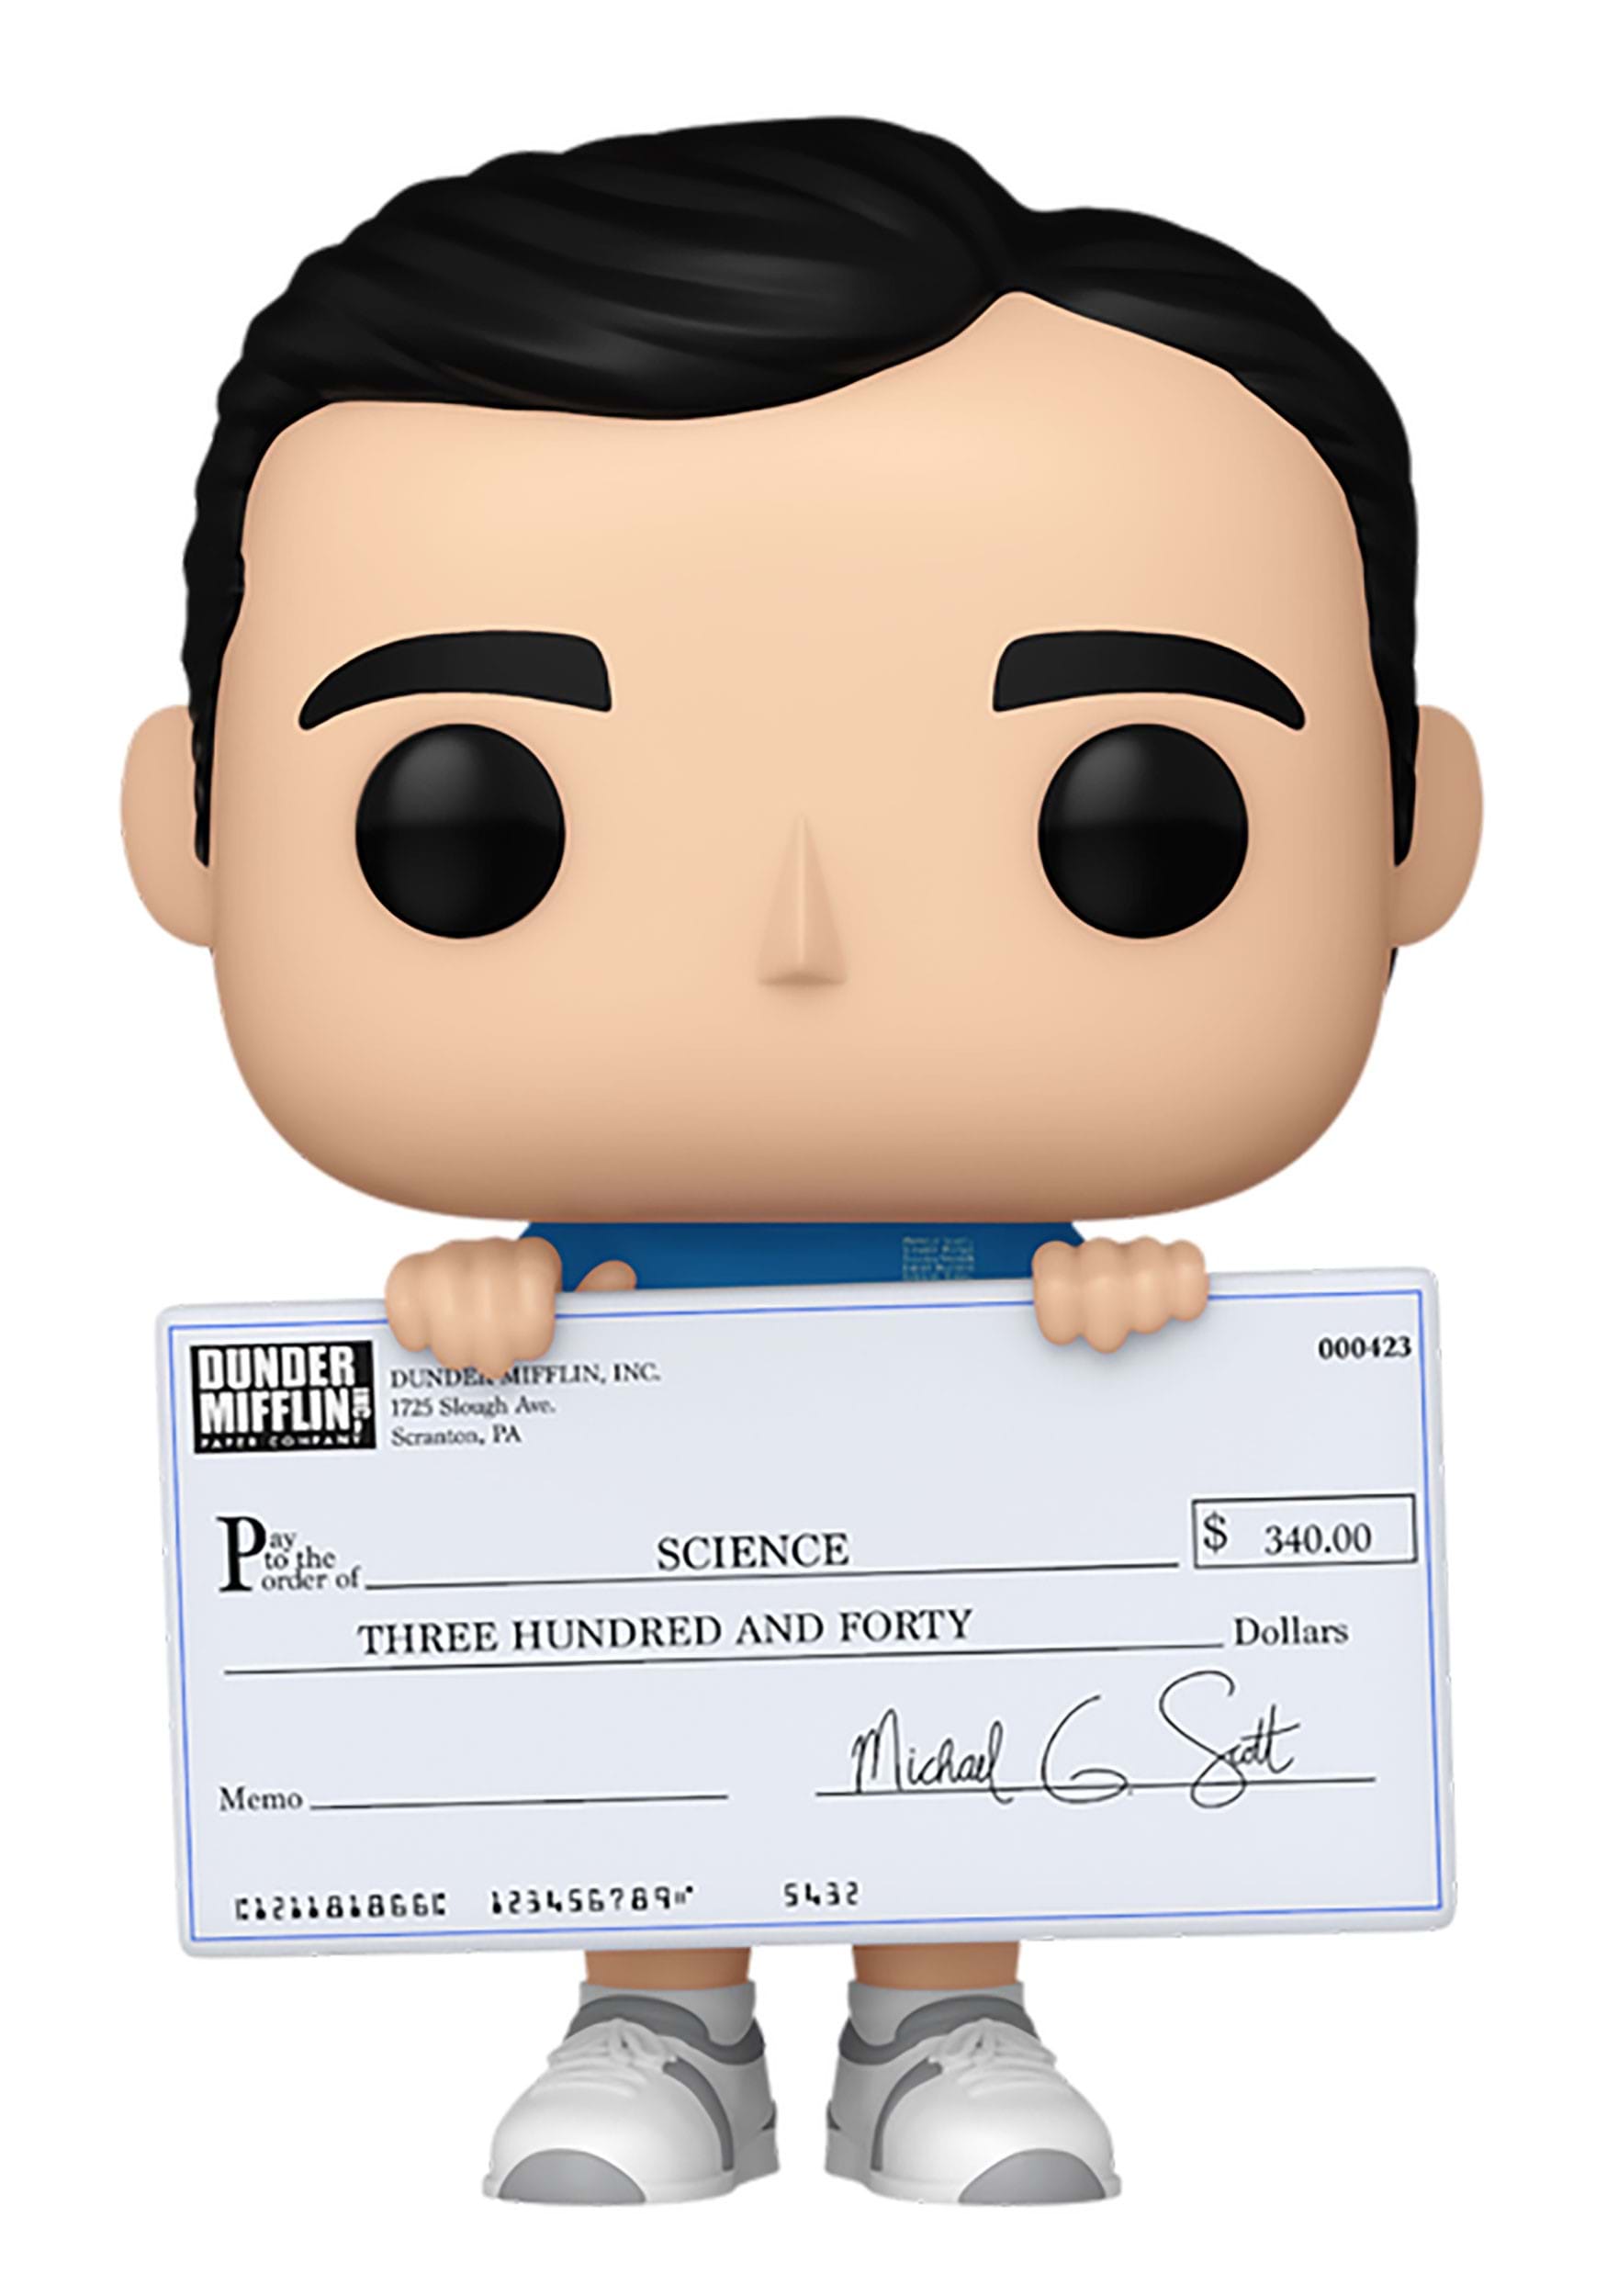 Funko POP! TV: The Office - Michael with Check | The Office Funko